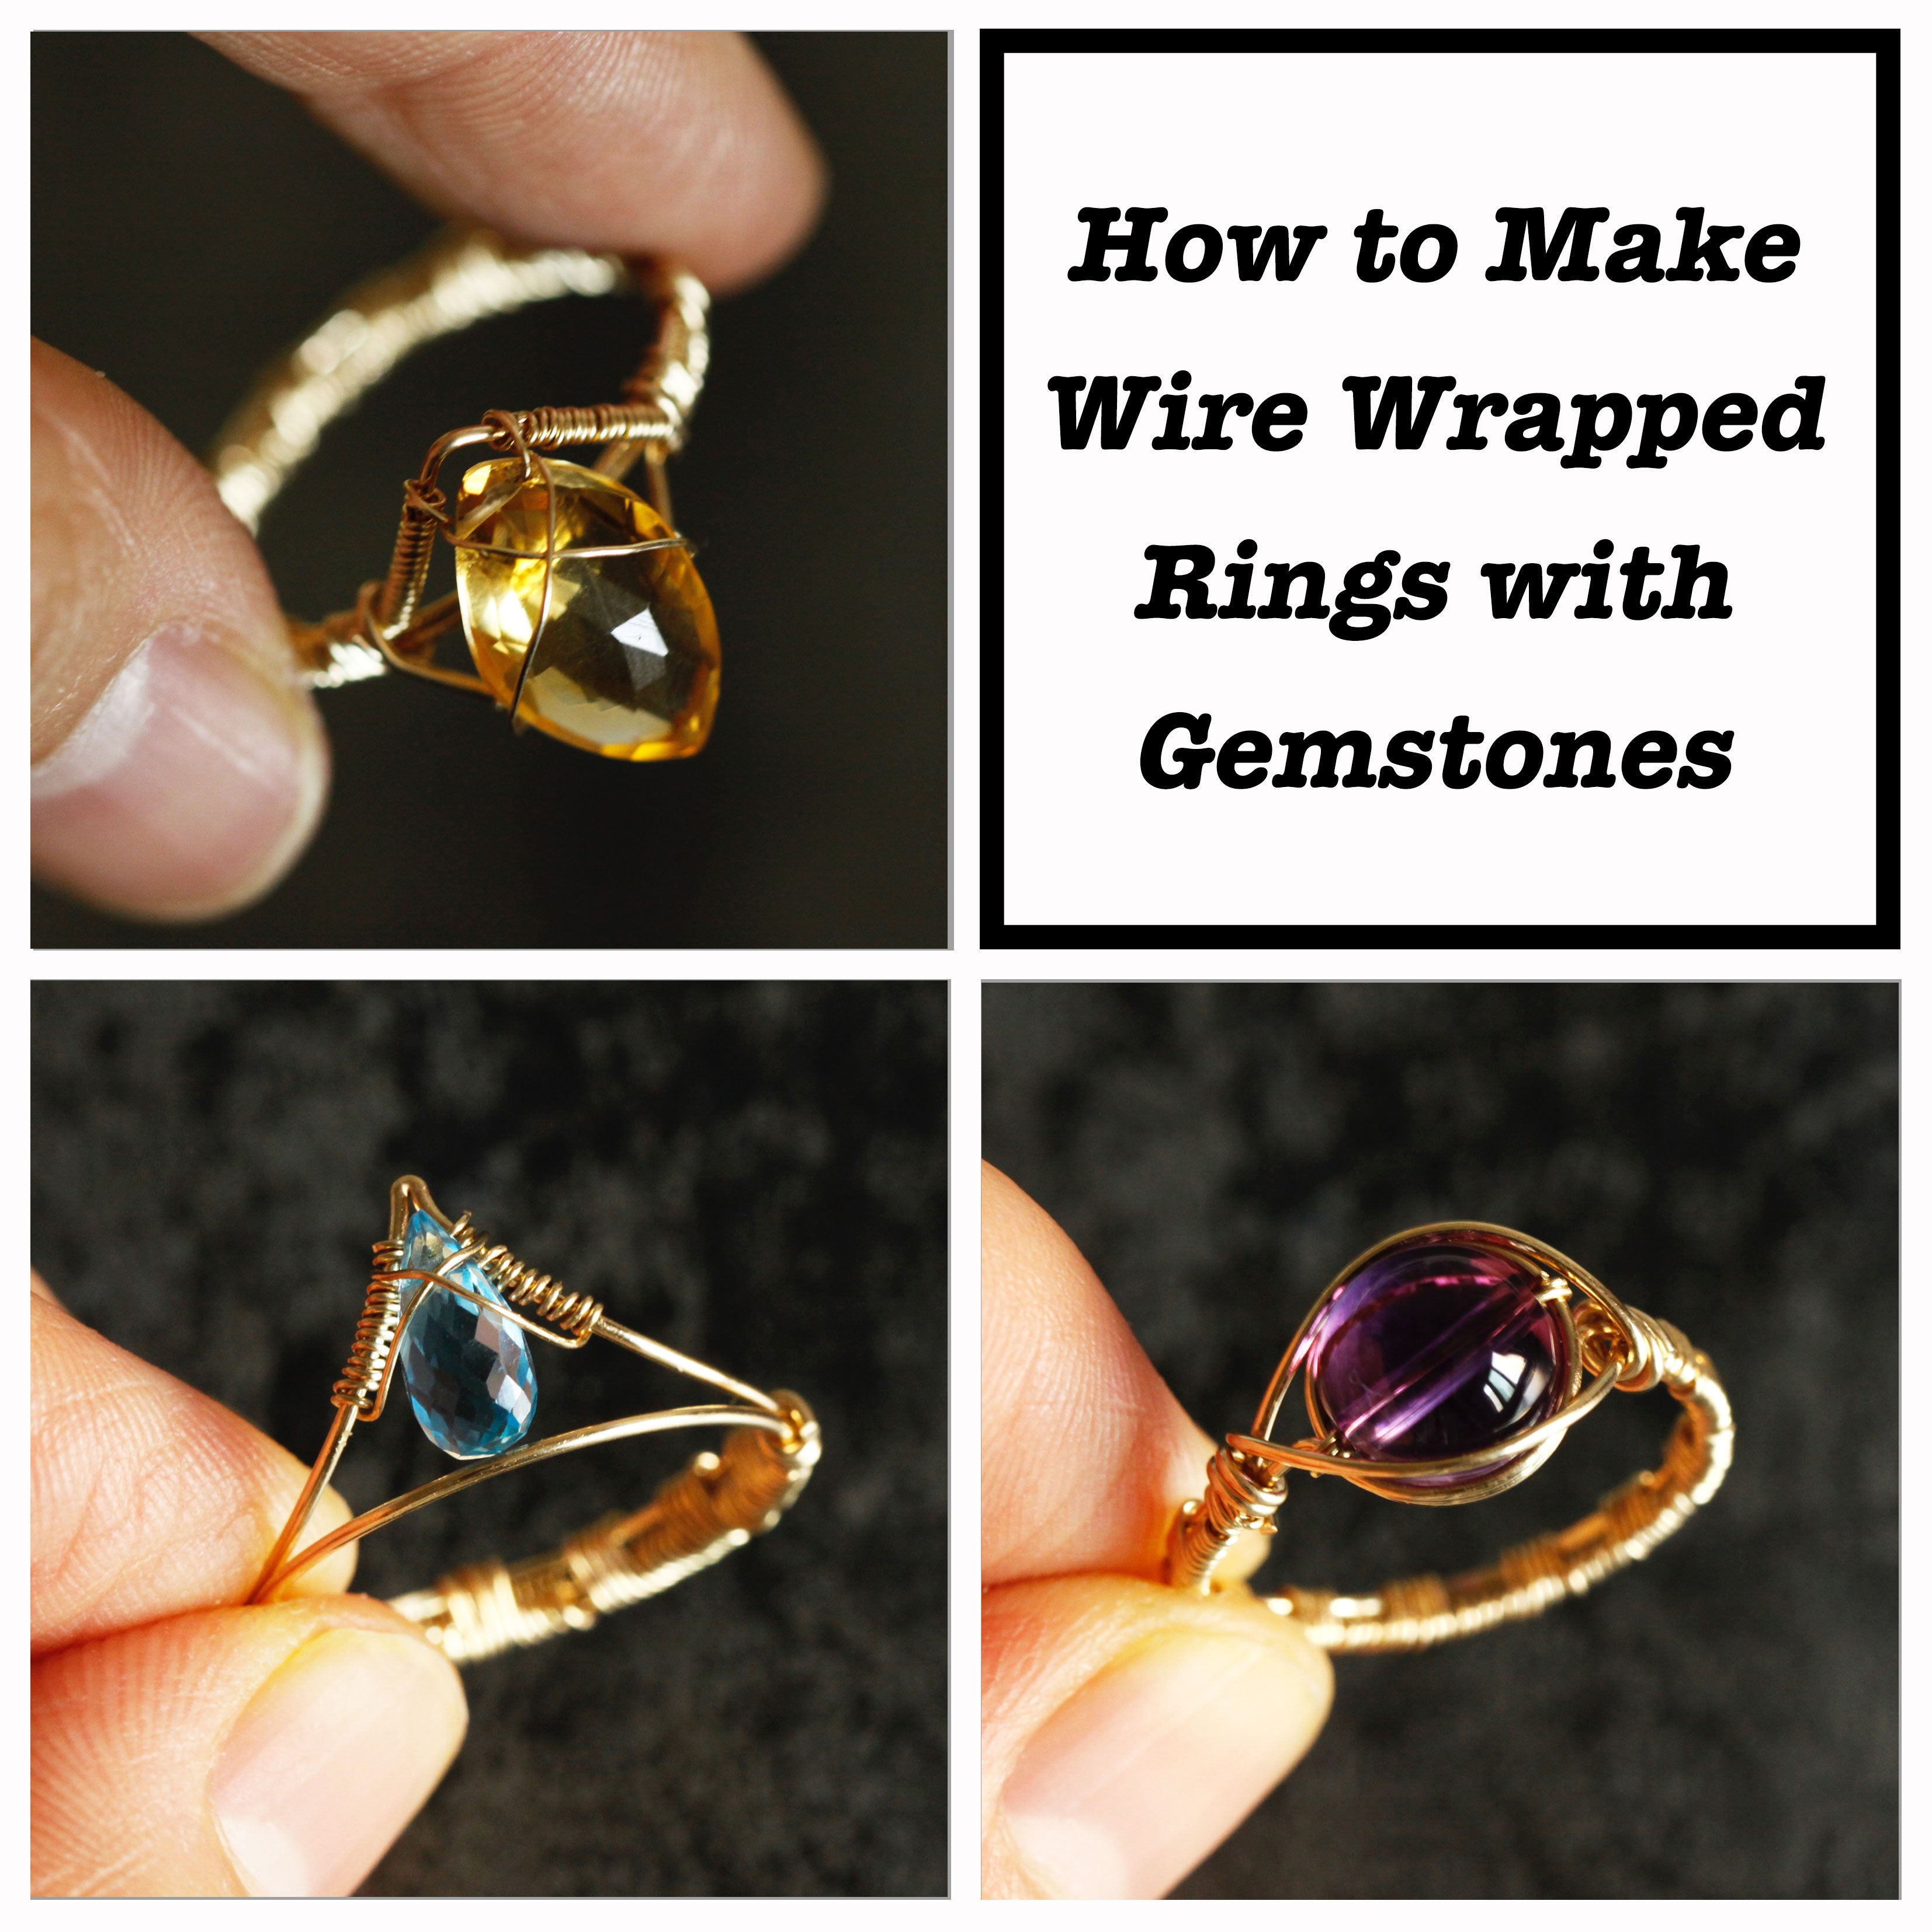 Wire Wrap Jewelry Making: The Essential Beginner's guide to learn